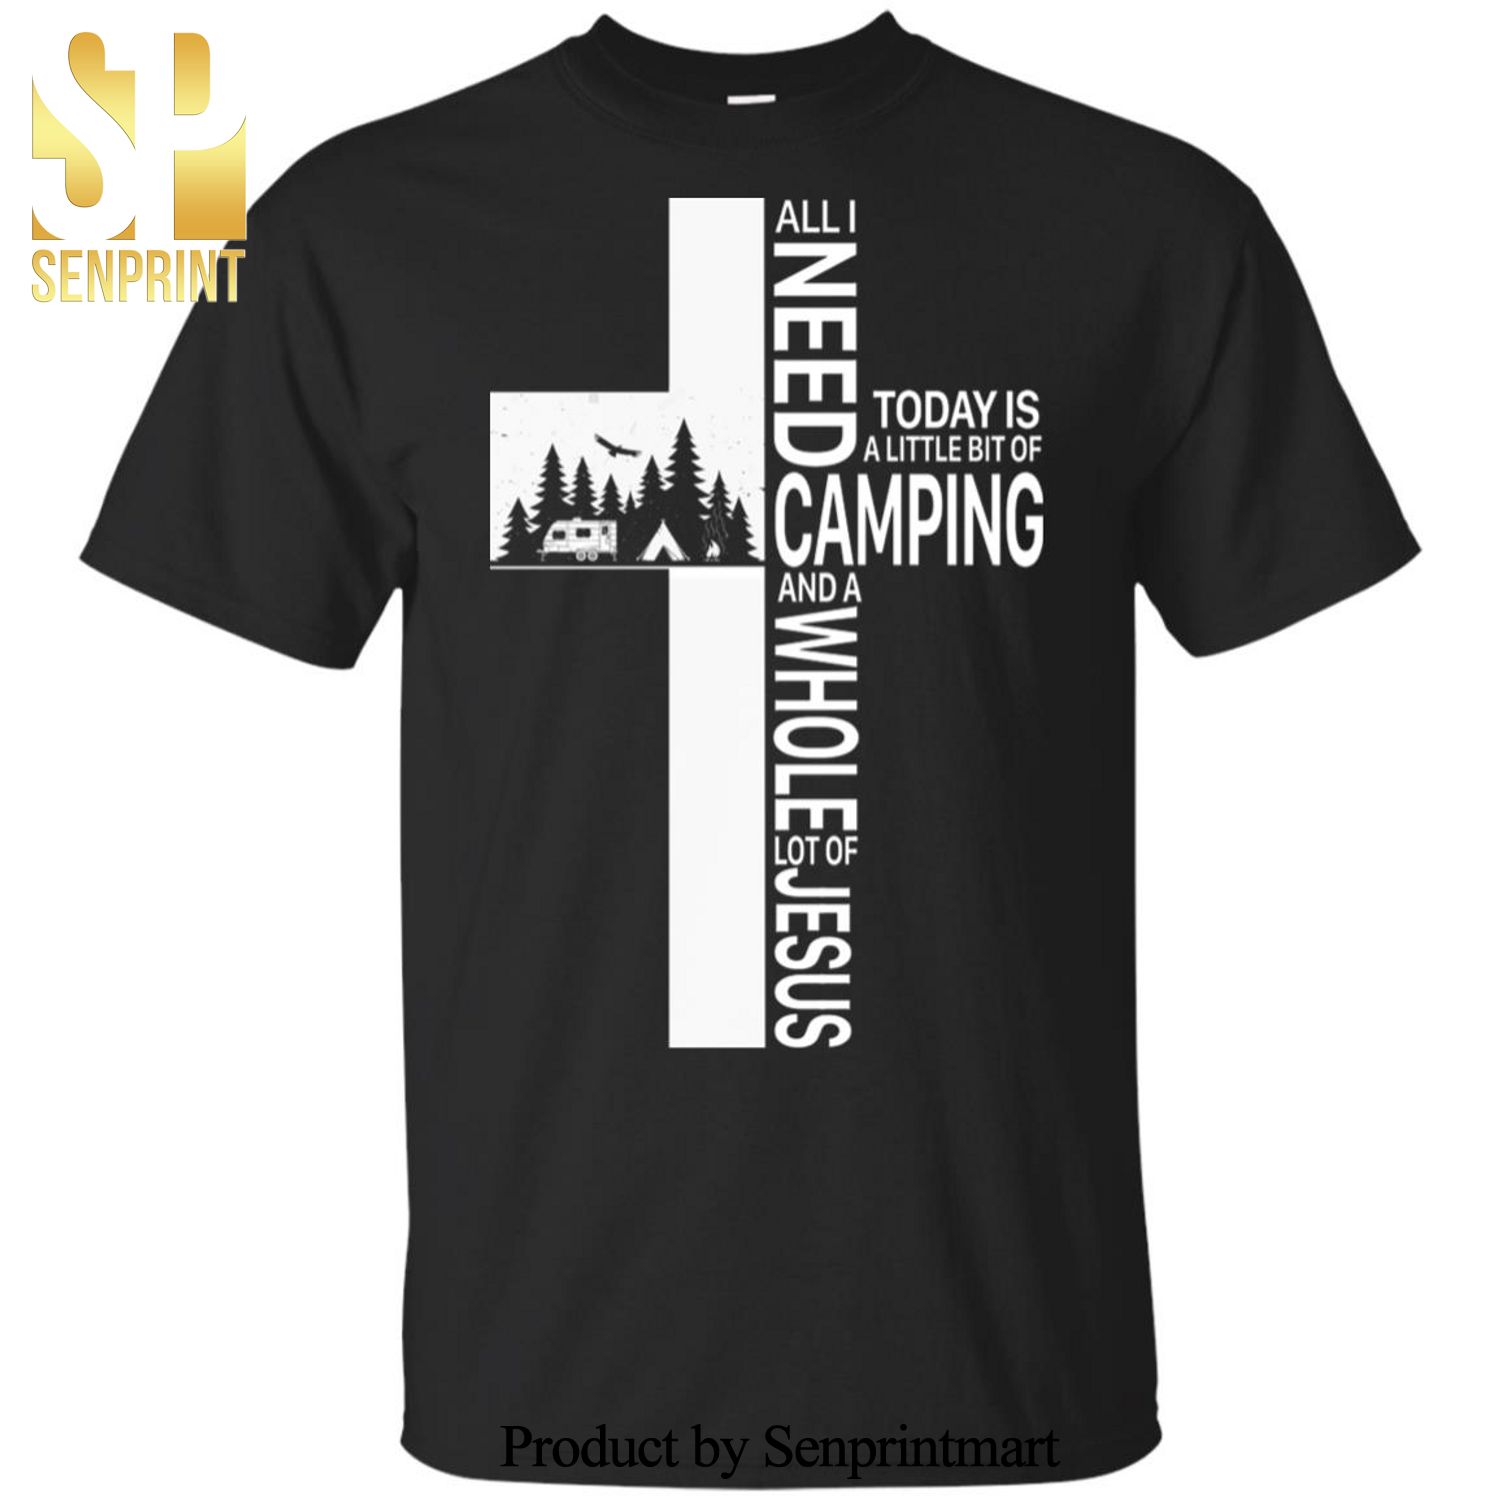 All I Need Today Is A Little Bit Of Camping And Jesus Cross Camper Gift Full Printed Unisex Shirt